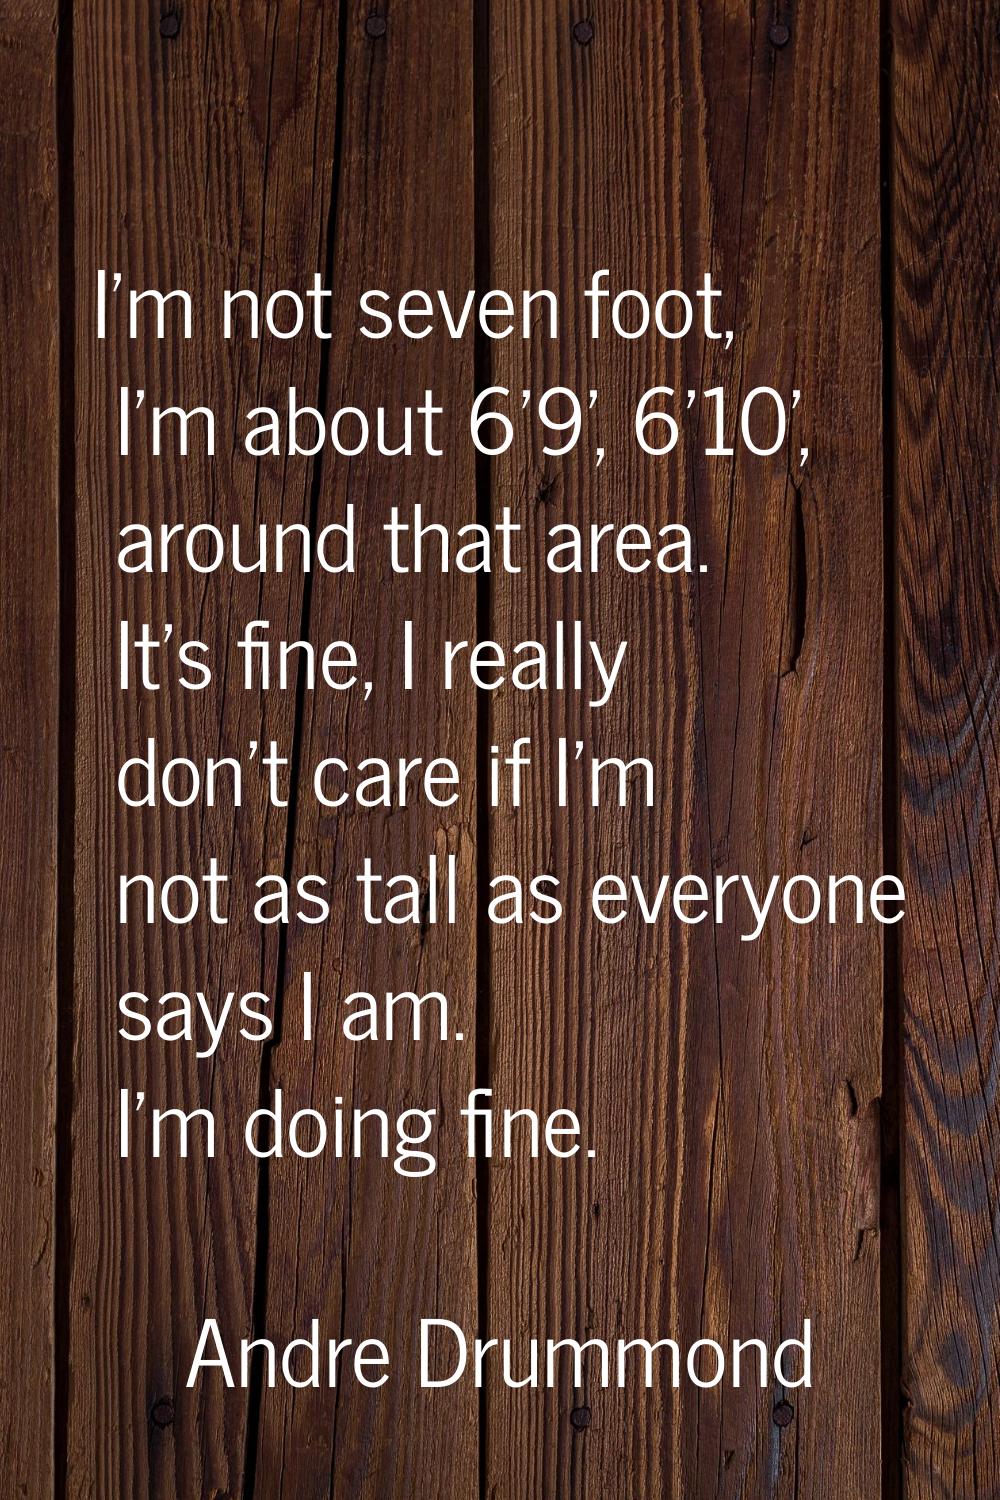 I'm not seven foot, I'm about 6'9', 6'10', around that area. It's fine, I really don't care if I'm 